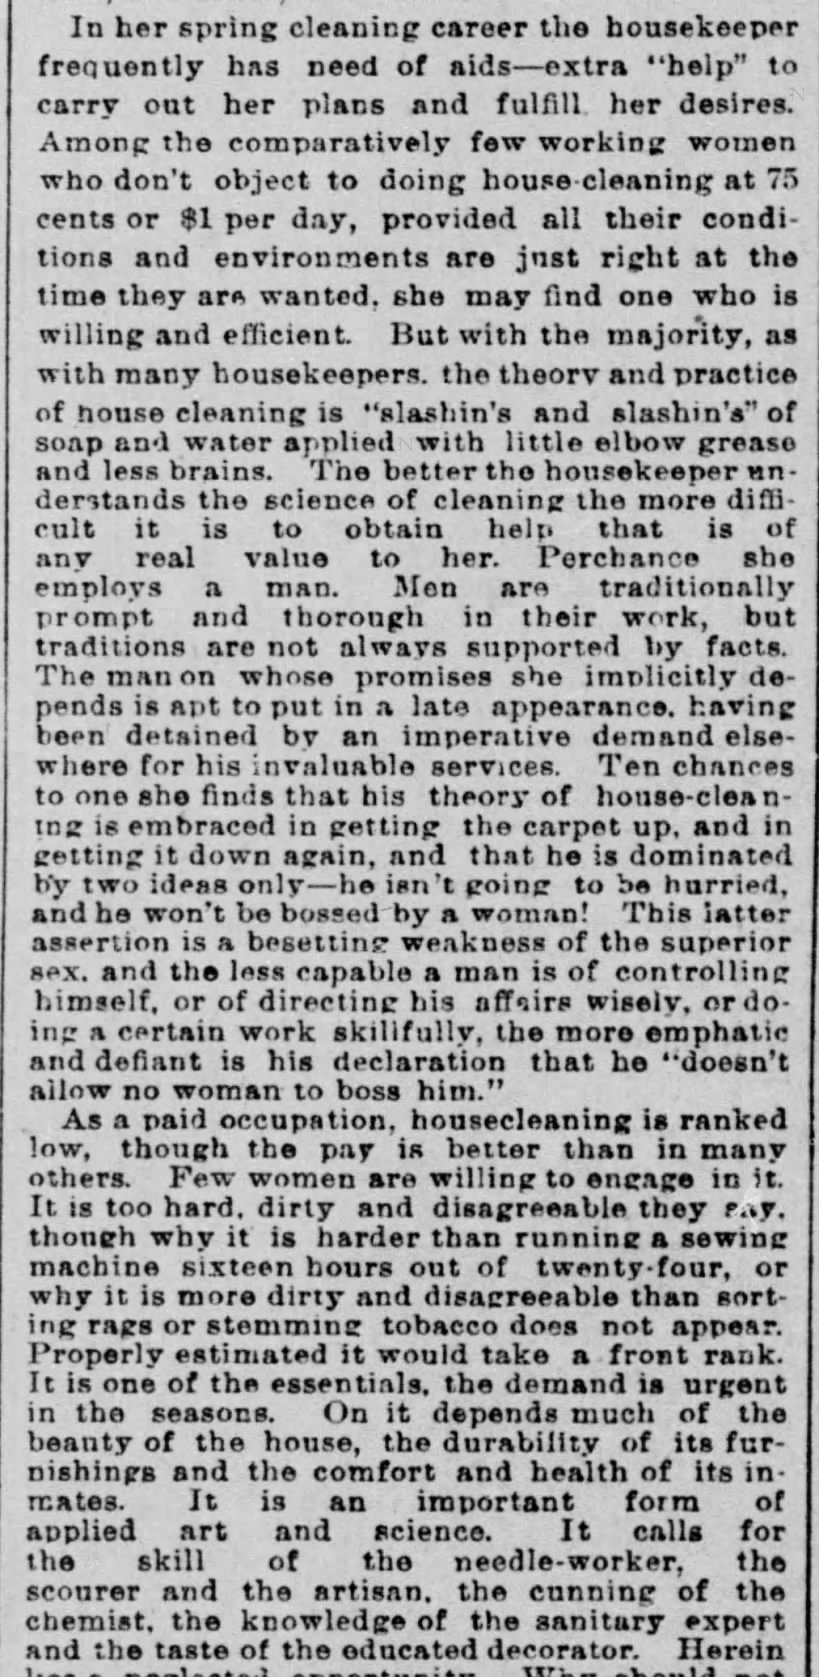 Observations on spring cleaning with paid help (1887)